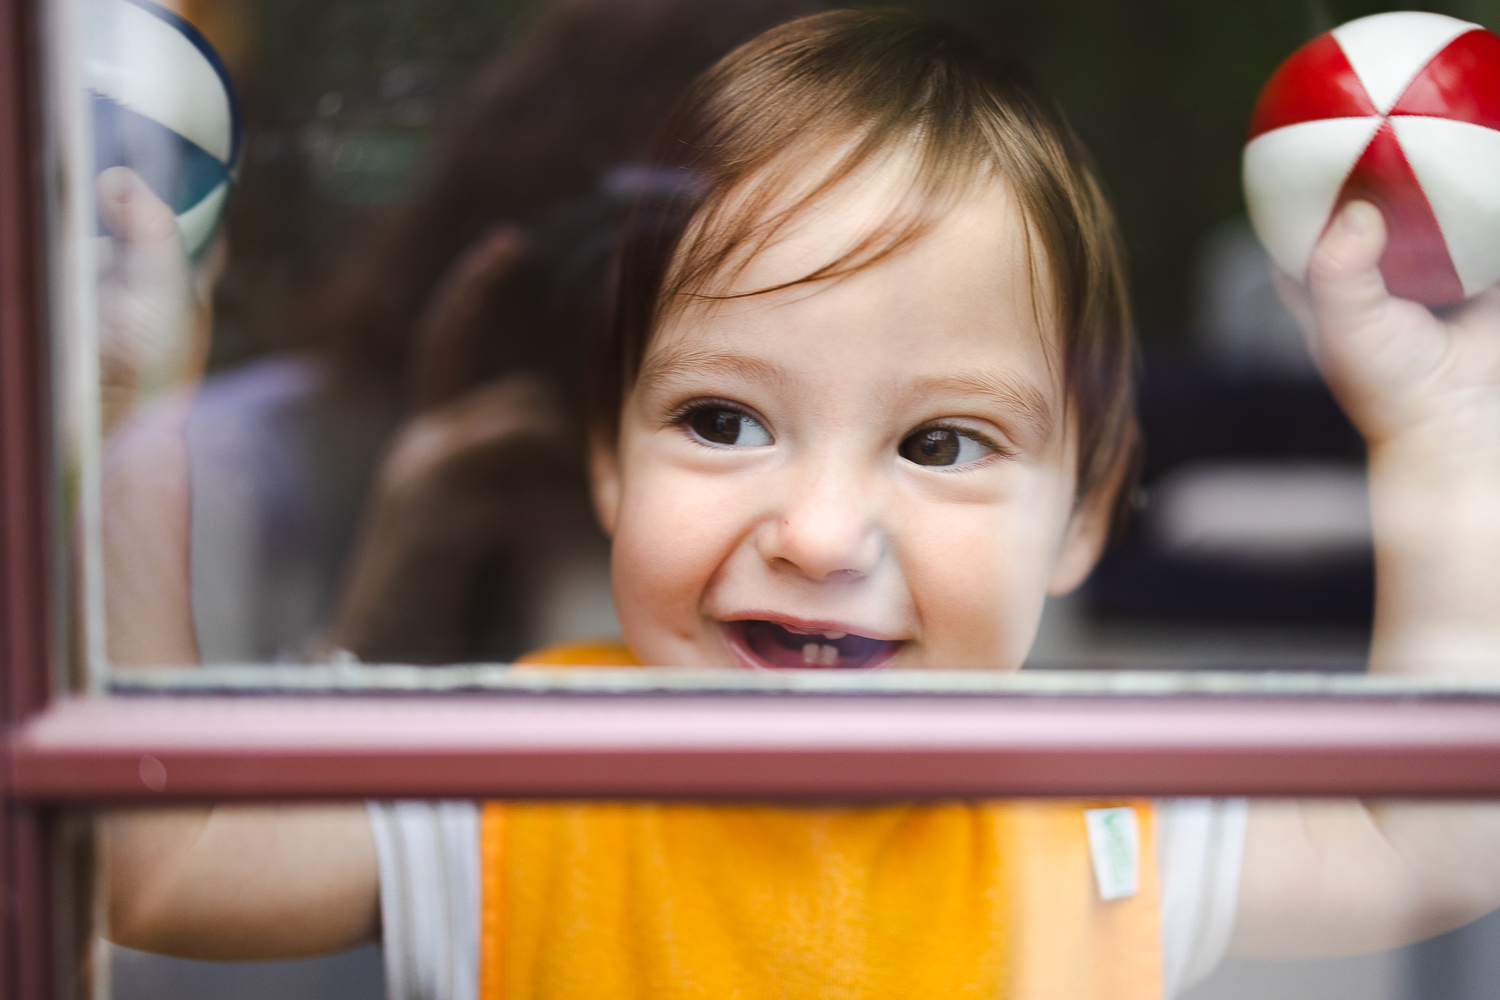 Photo taken through a window of a baby looking out and smiling big, his two bottom teeth showing.